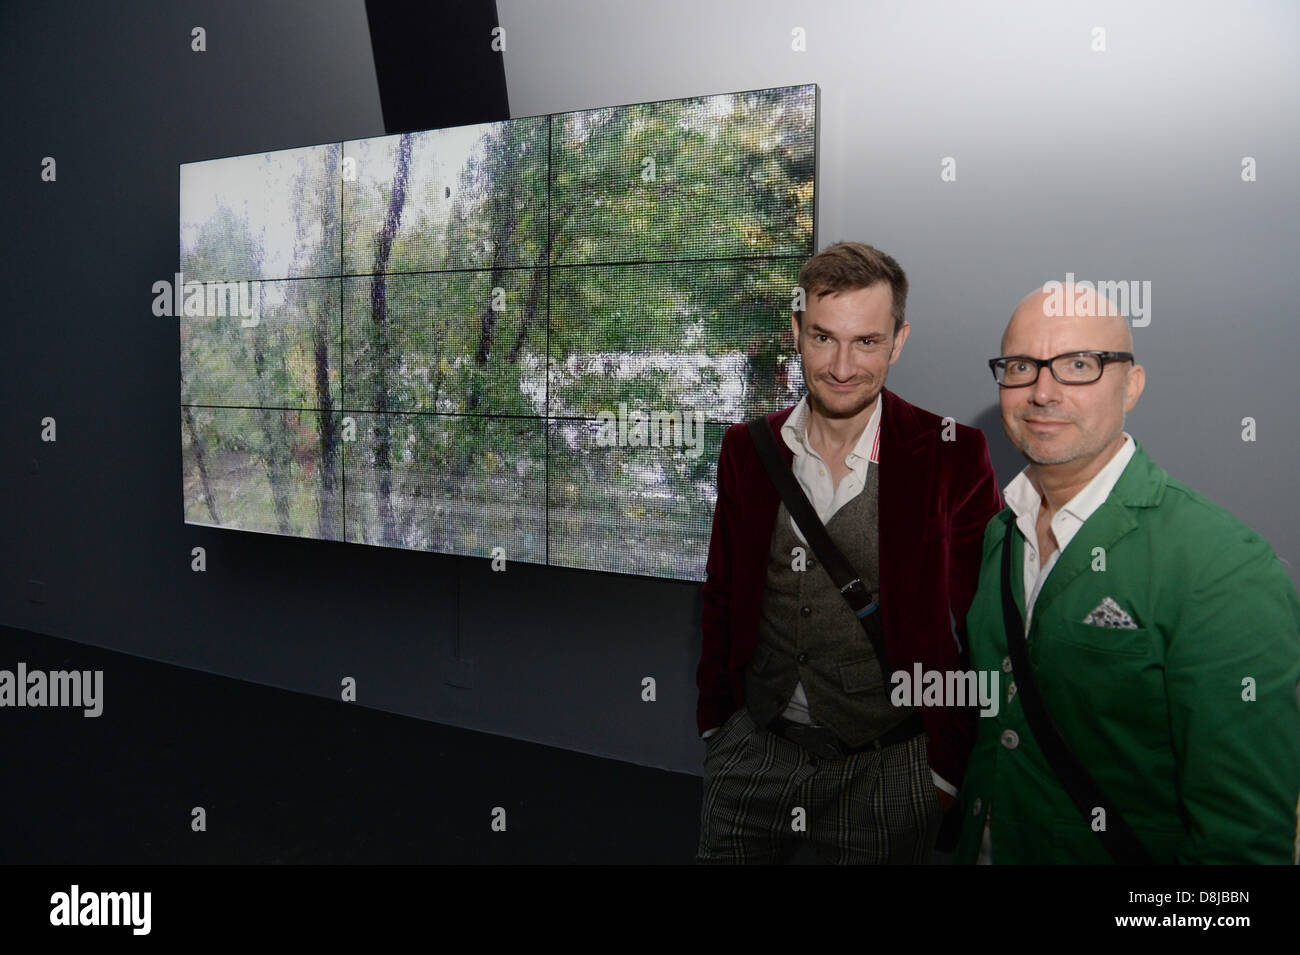 Curator of the Pinakothek of Modern Art, Bernhard Schwenk (R) and fashion designer Miro Craemer pose in front a German contribution by Romuald Karmakar titled 'Anticipation' in the French pavilion Venice, Italy, 29 May 2013. Germany and France have swapped their pavilions for this year's Venice Biennale and use them as a platform for international artists. The 55th international contemporary art exhibition, La Biennale di Venezia 2013, will be opened on 01 June. Photo: Felix Hoerhager/dpa/Alamy Live News Stock Photo